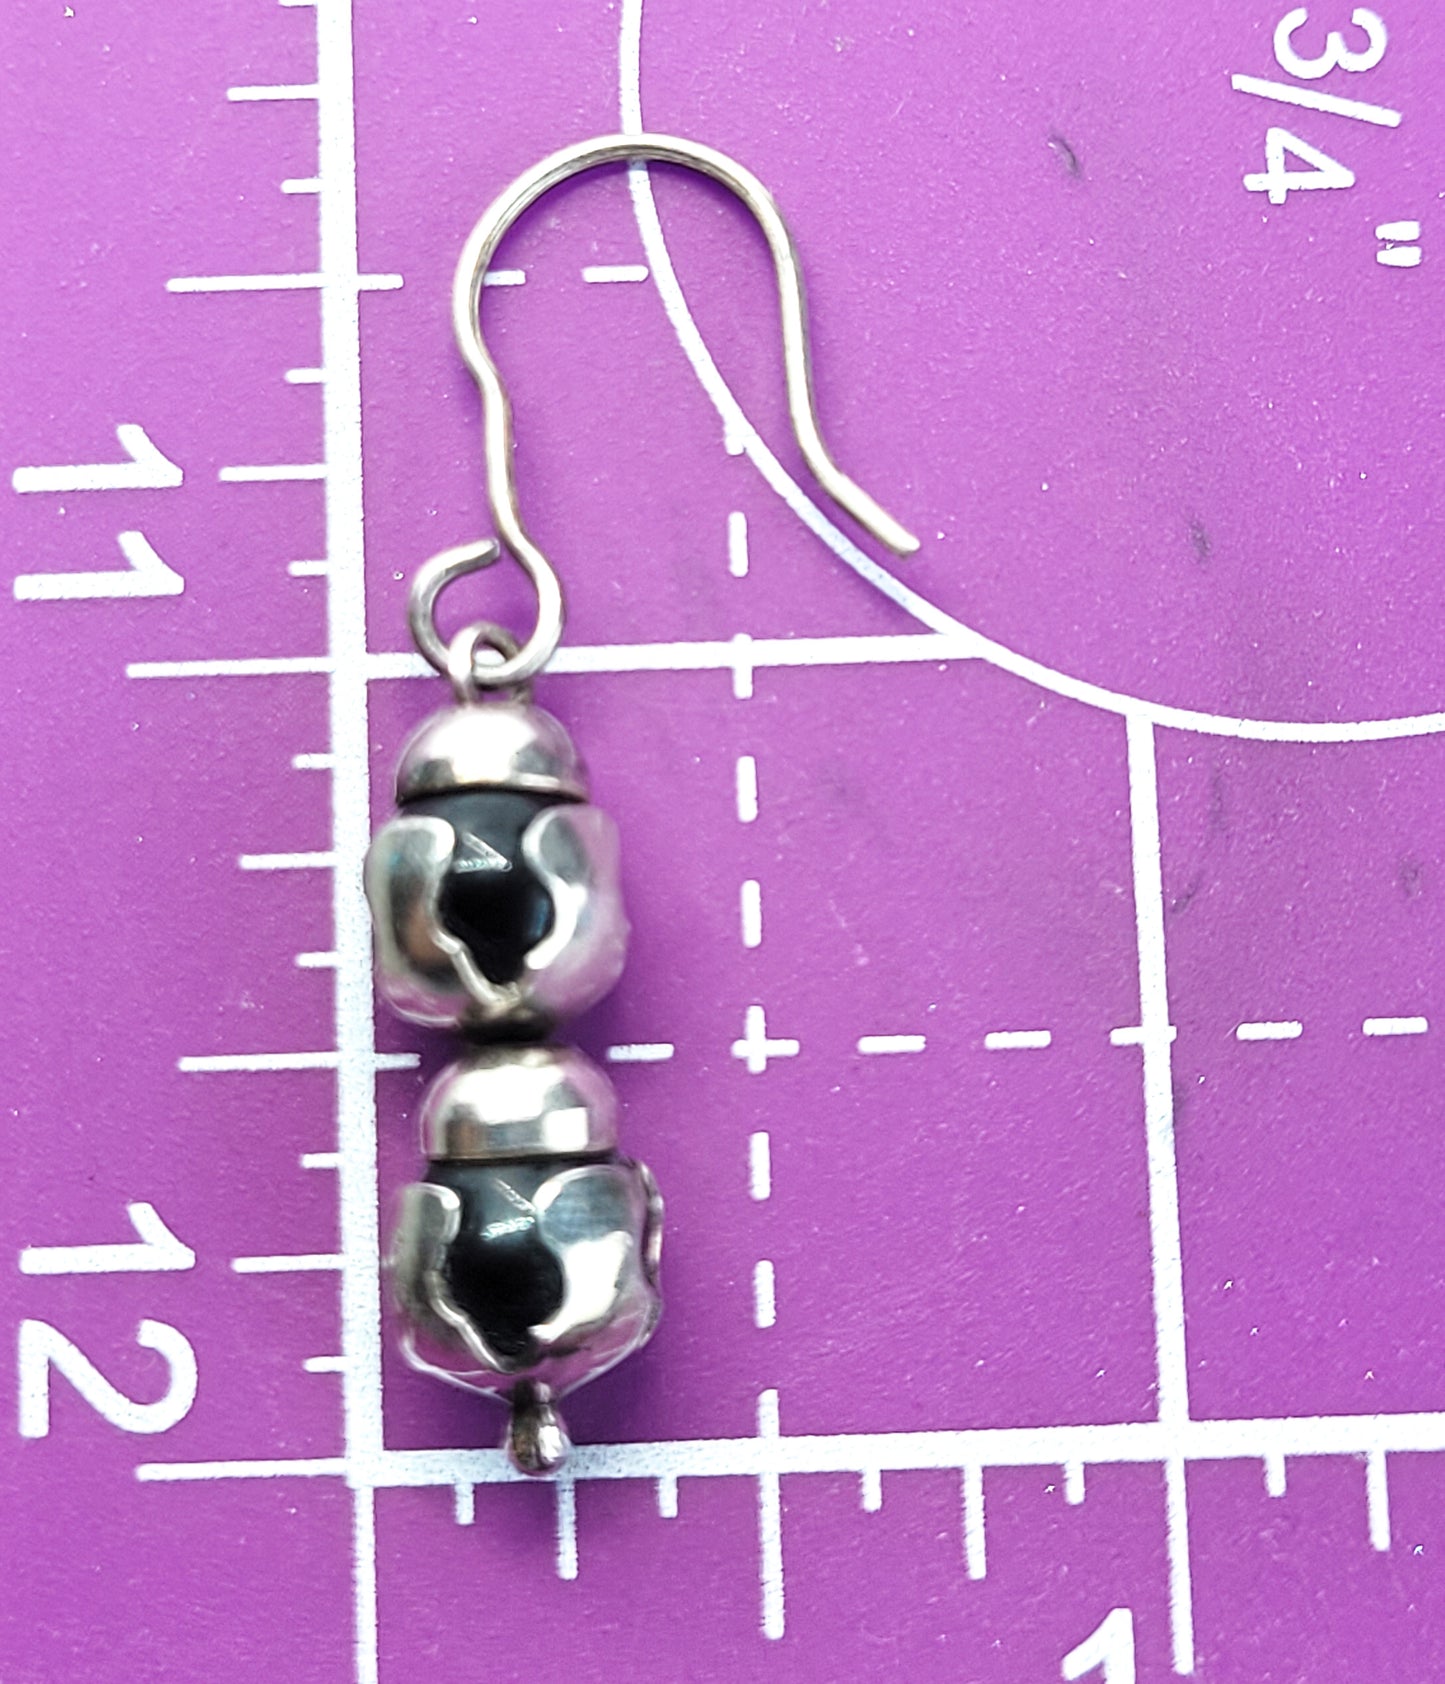 Black and silver abstract drop sterling silver beaded vintage hook earrings 925